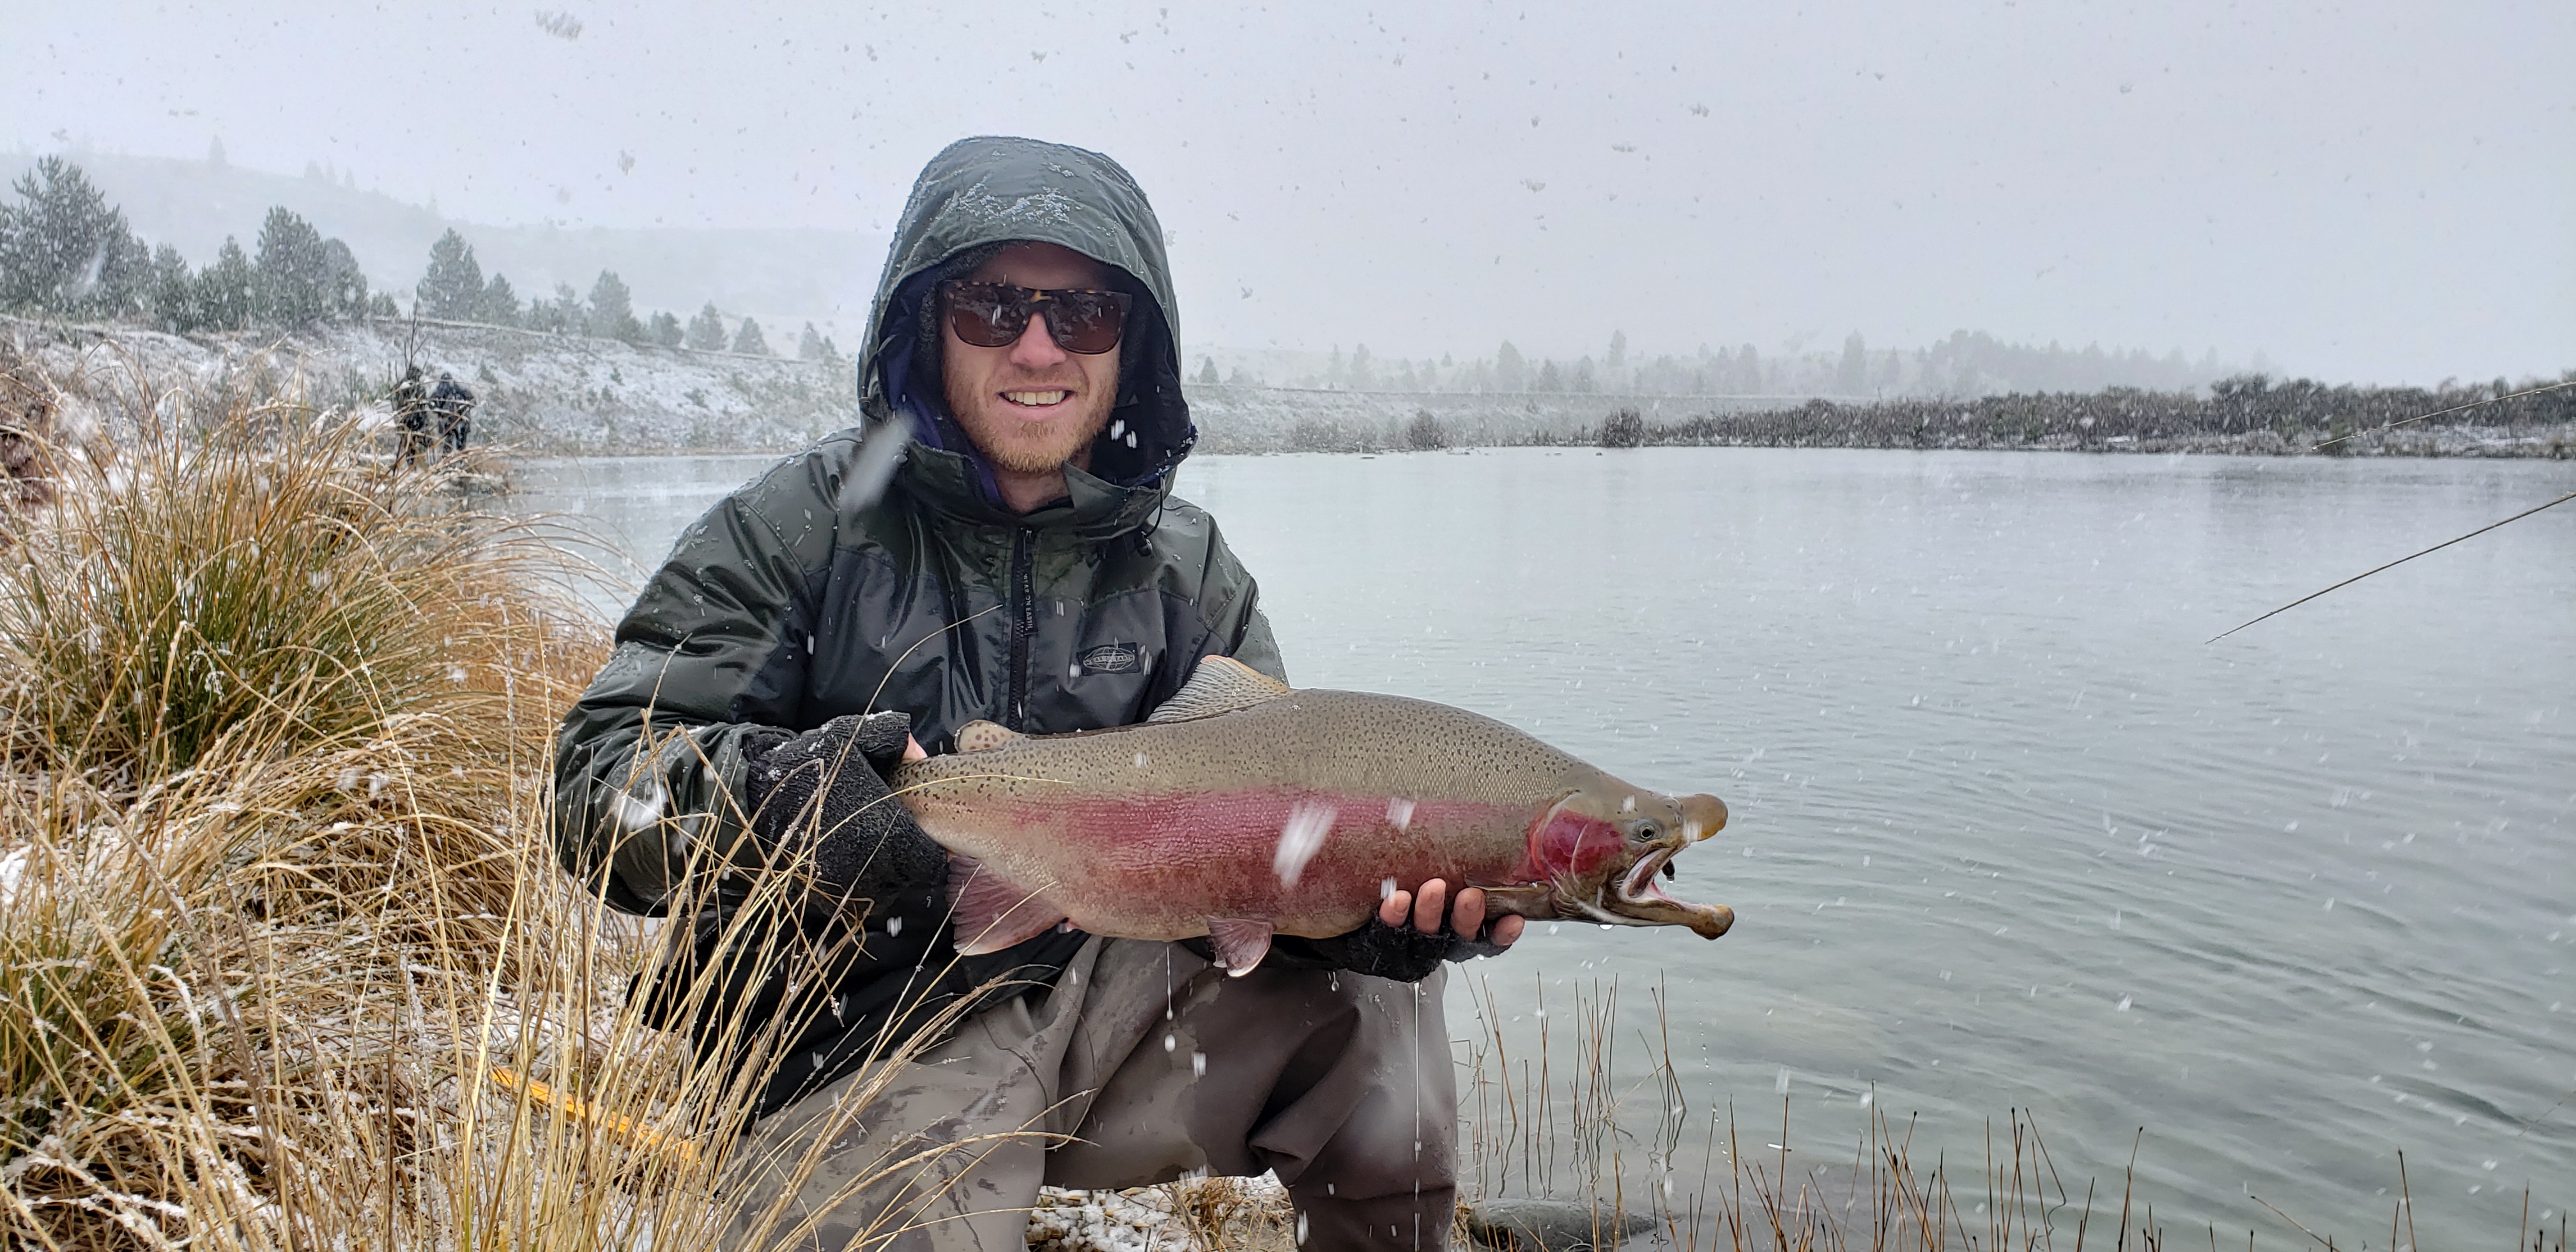 RL CSI 2 Ben Reeves fishing in the snow on the opening day of the 2020 Uper Ohau Spring Season Credit R Adams